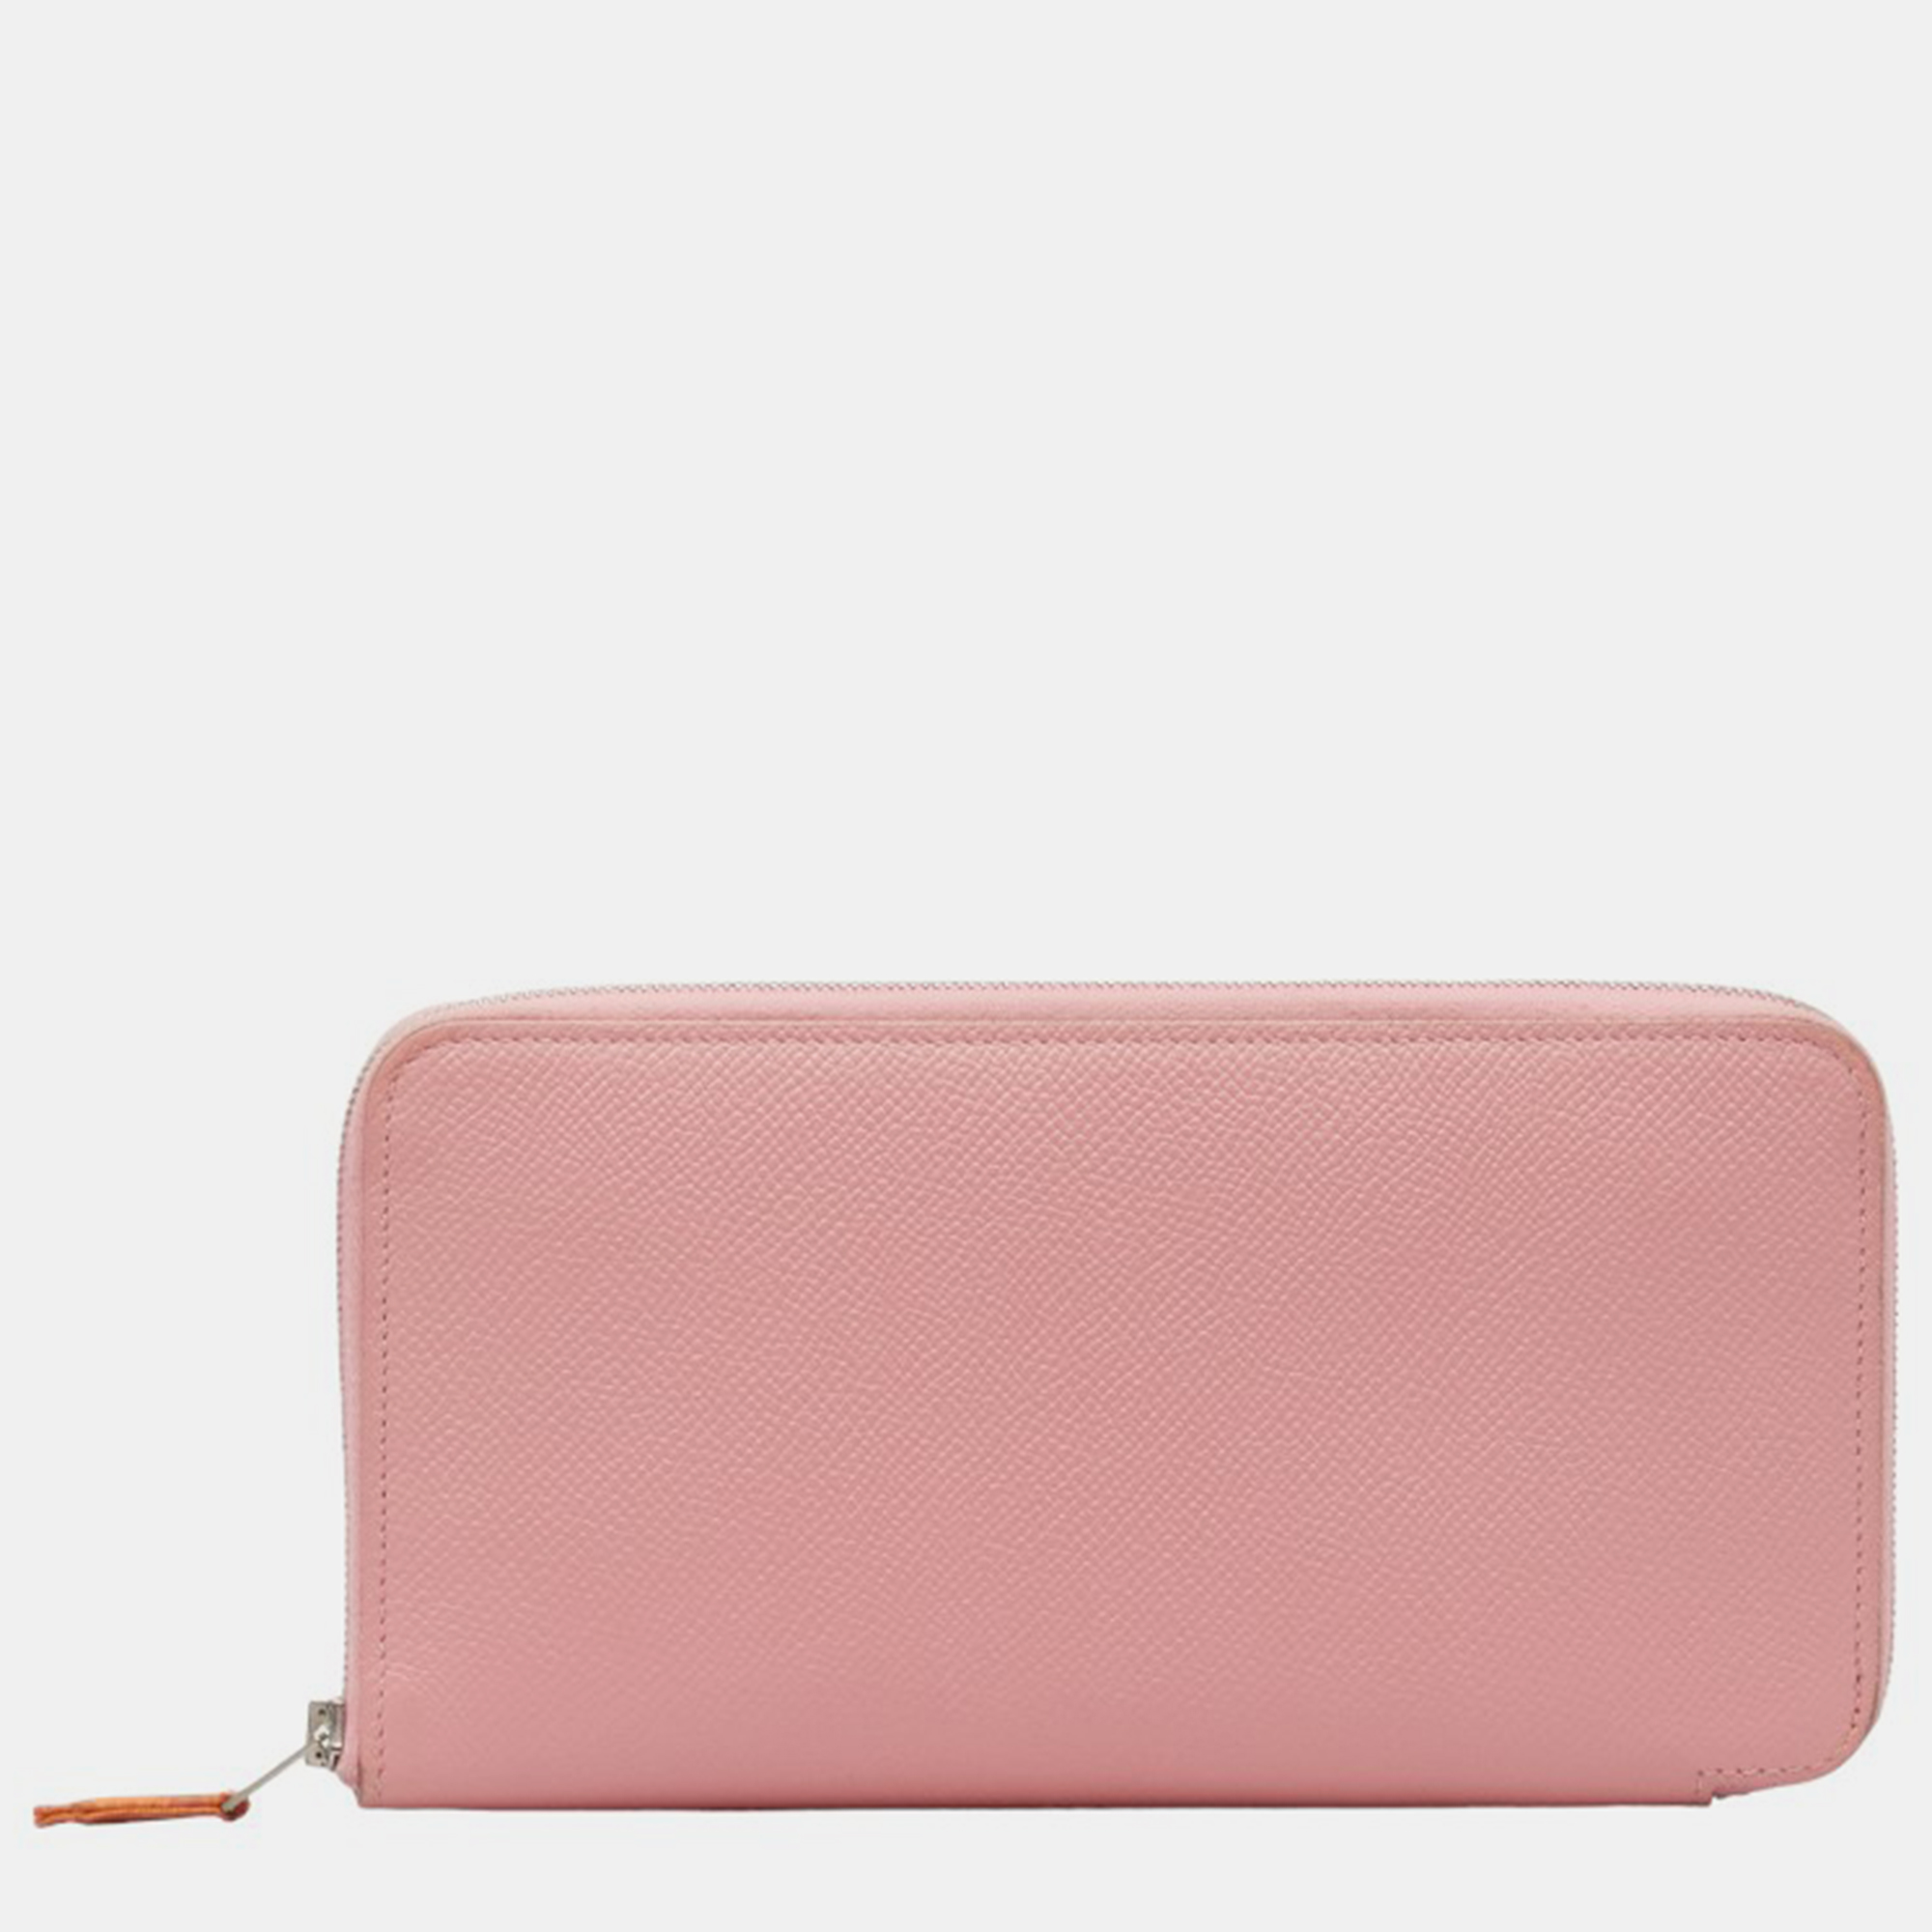 Hermes pink leather epsom leather azap classic wallet